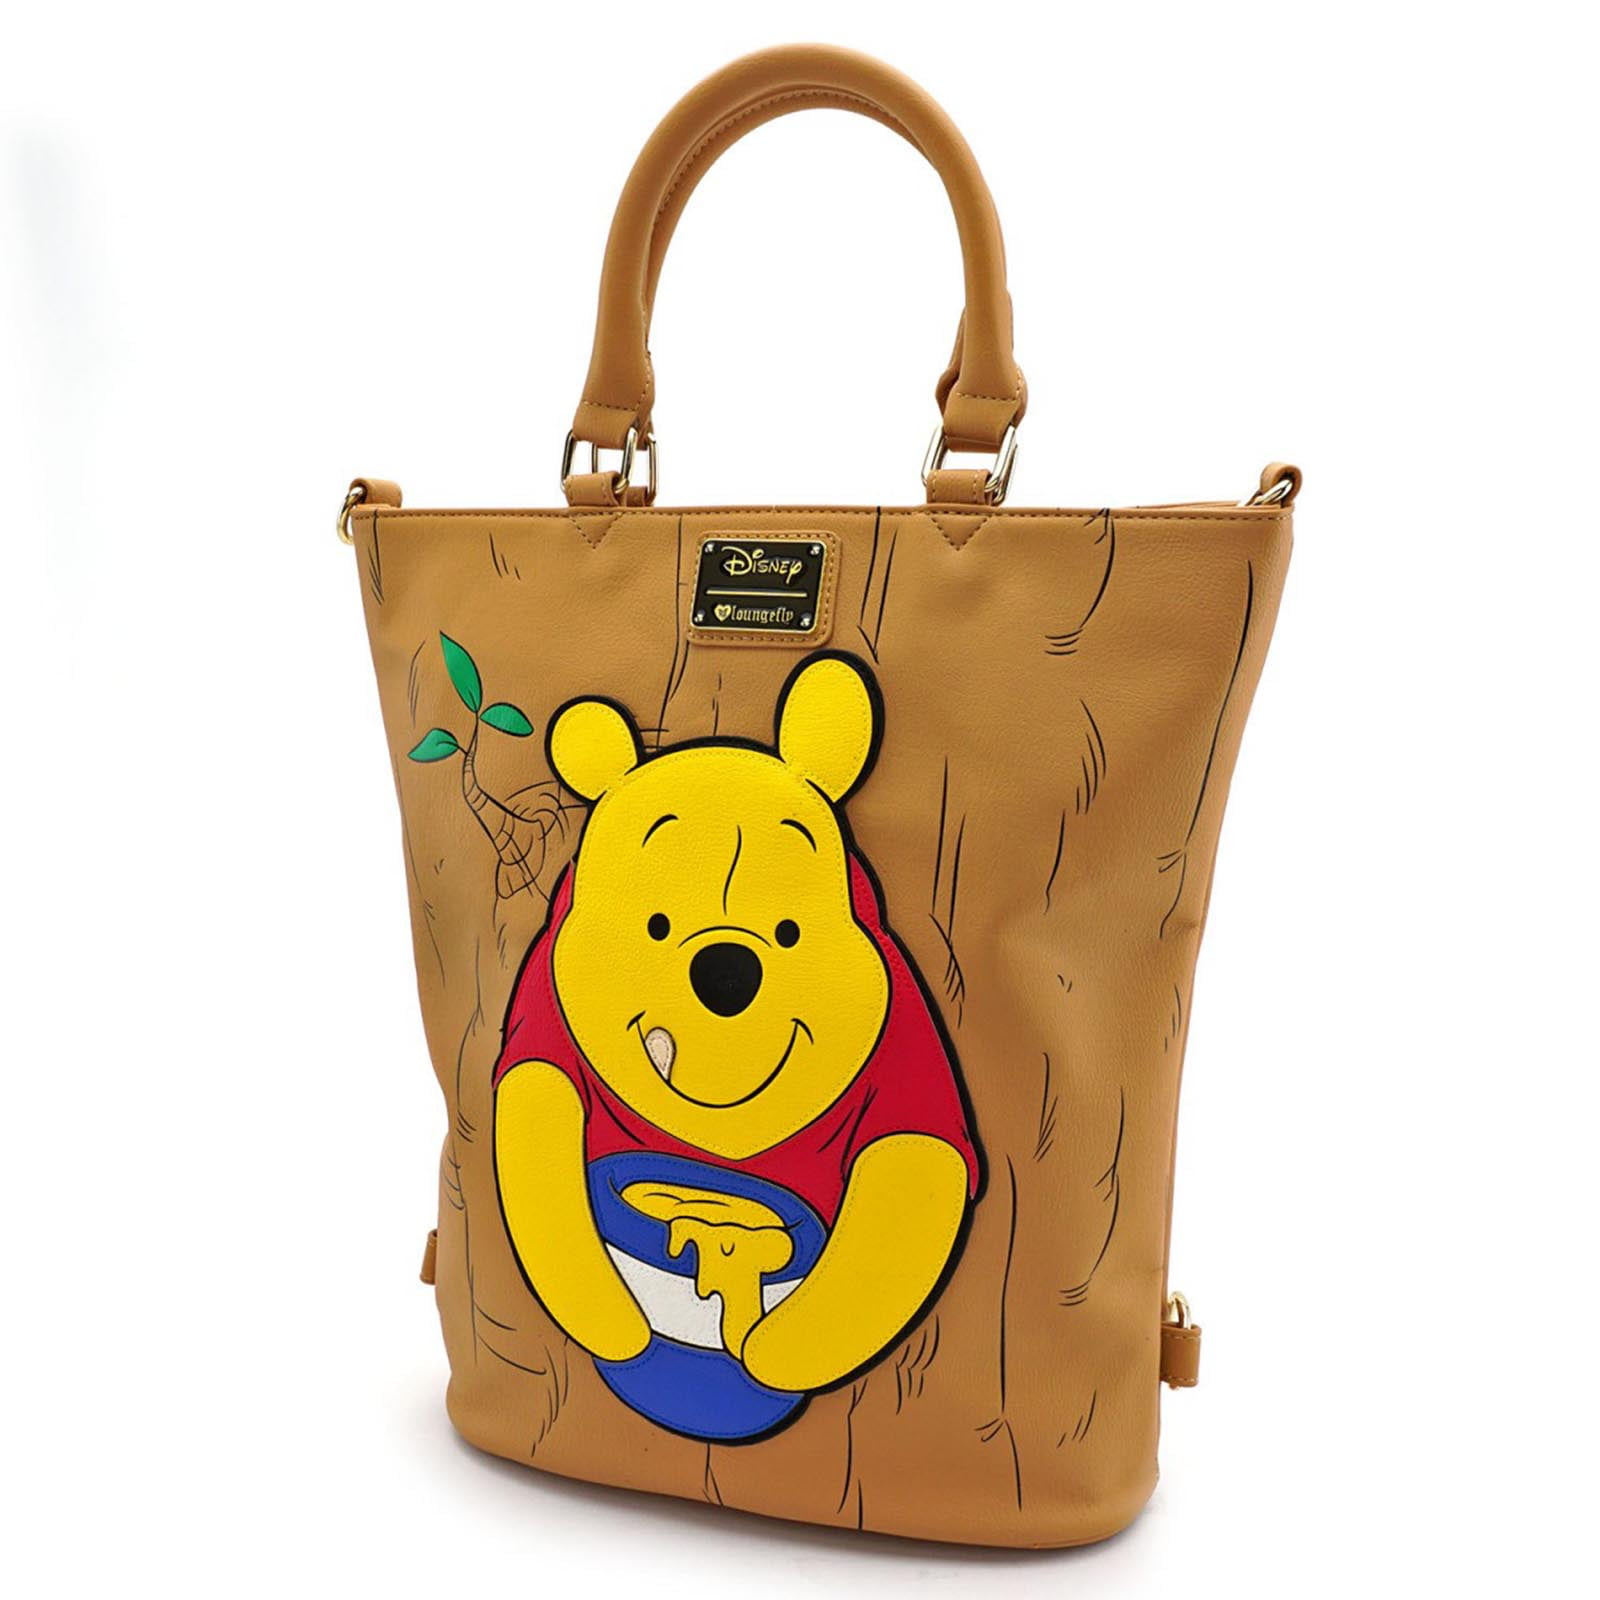 Winnie Pooh Backpack Travel Laptop Backpack with USB Charging Port Headphone Interface College Bookbag for Women Men Boys Business Travel Anti Theft Backpack